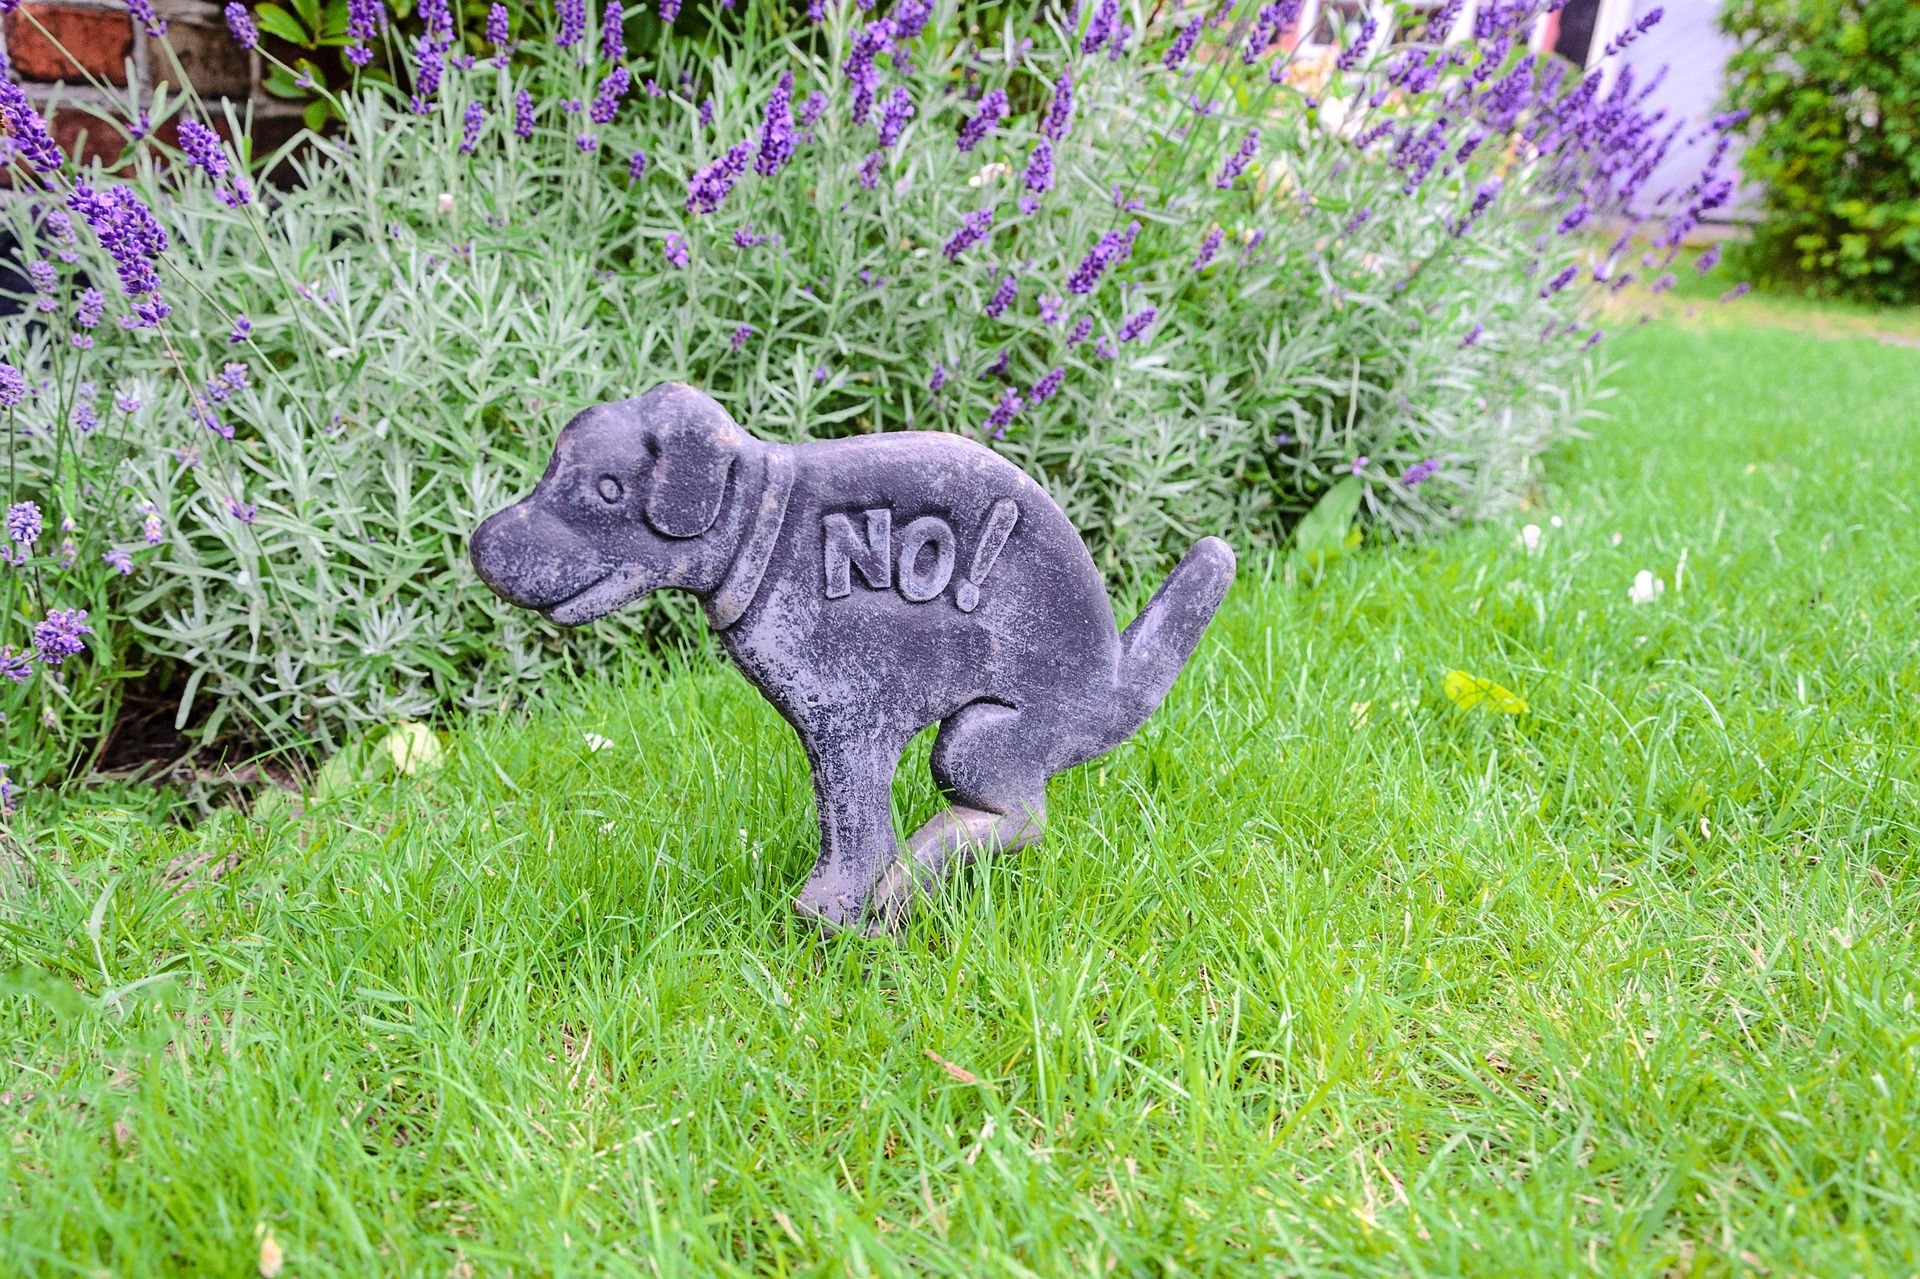 Statue of a dog in the grass